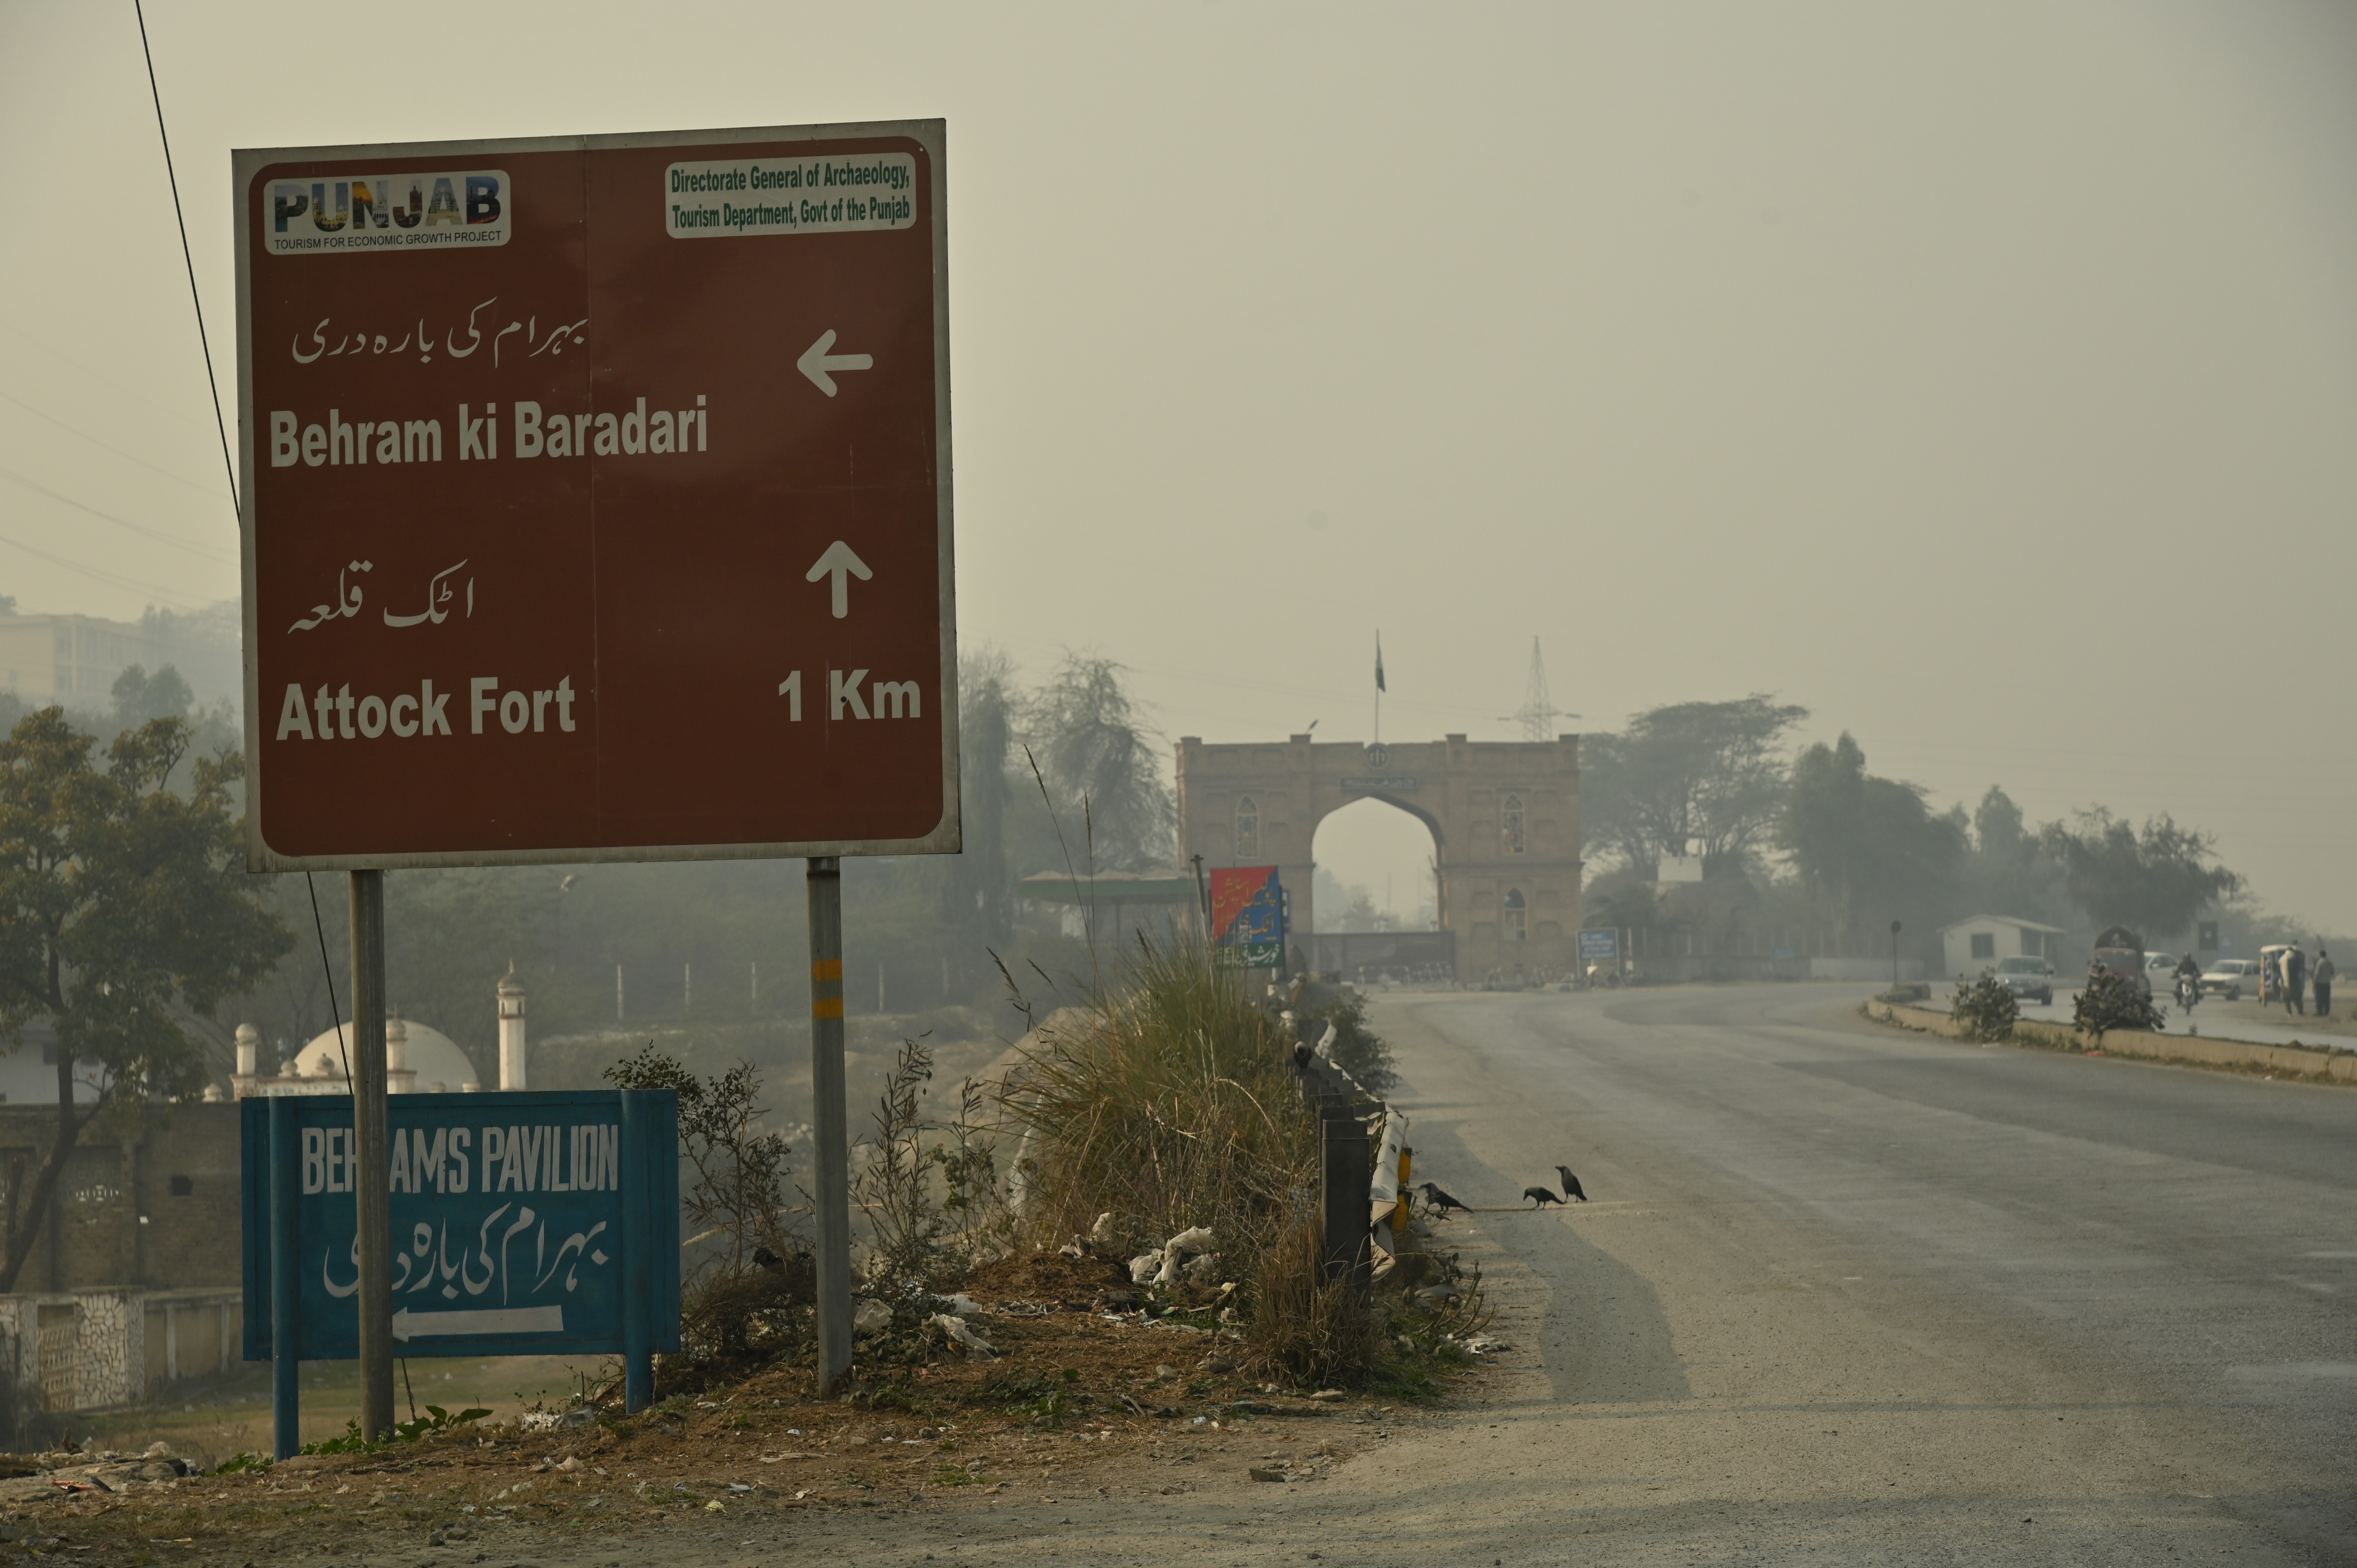 The direction board indicates the direction of The Attock Fort and Behram ki Baradari